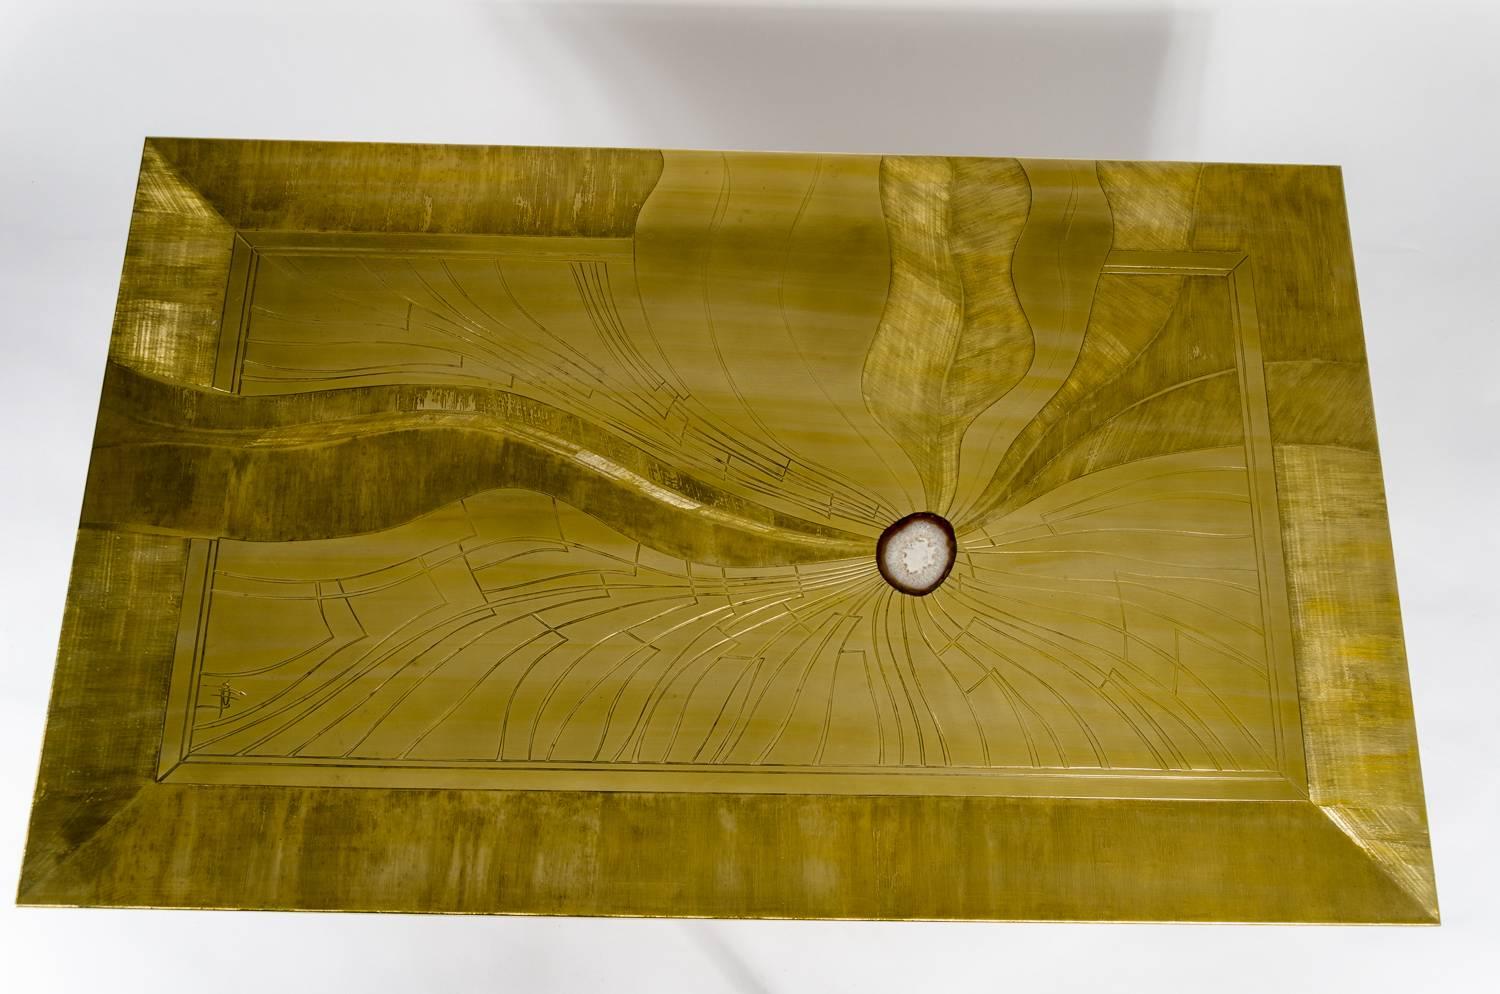 Etched brass coffee table inlay Agate by Jonasz, circa 1970, signed by the artist, new polish and varnish, perfect condition.